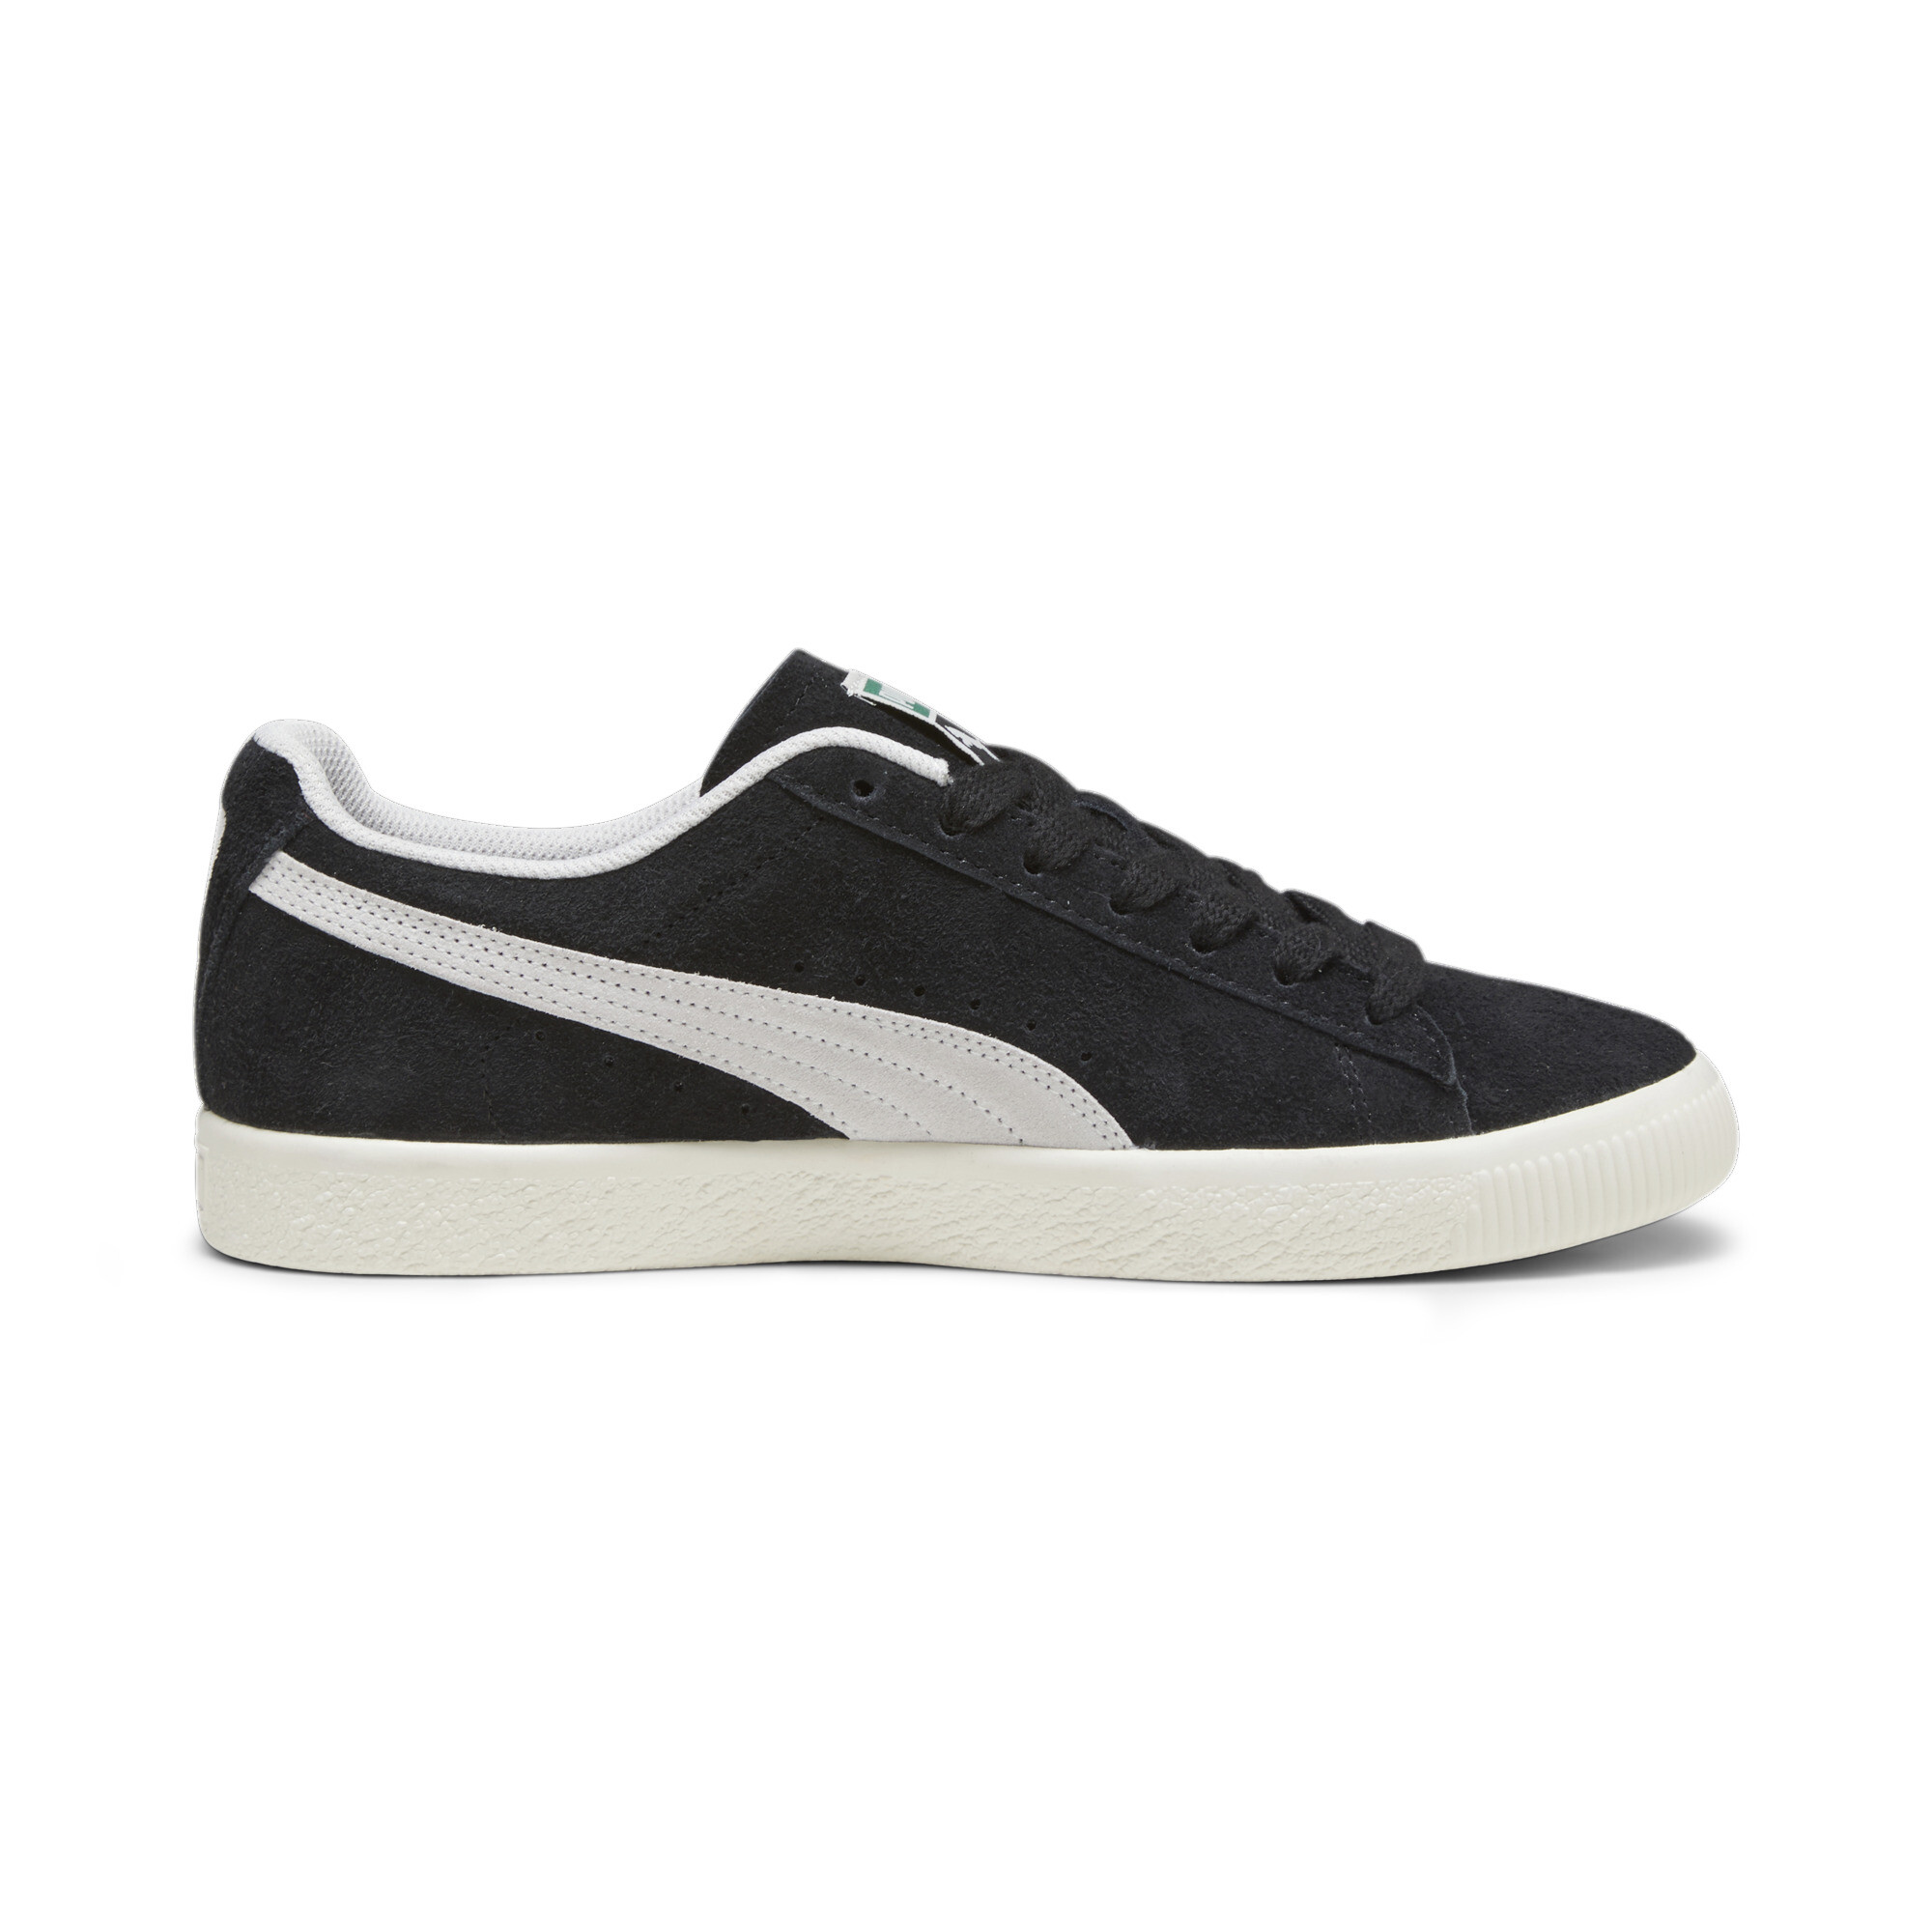 Men's PUMA Clyde Hairy Suede Sneakers In Black, Size EU 43